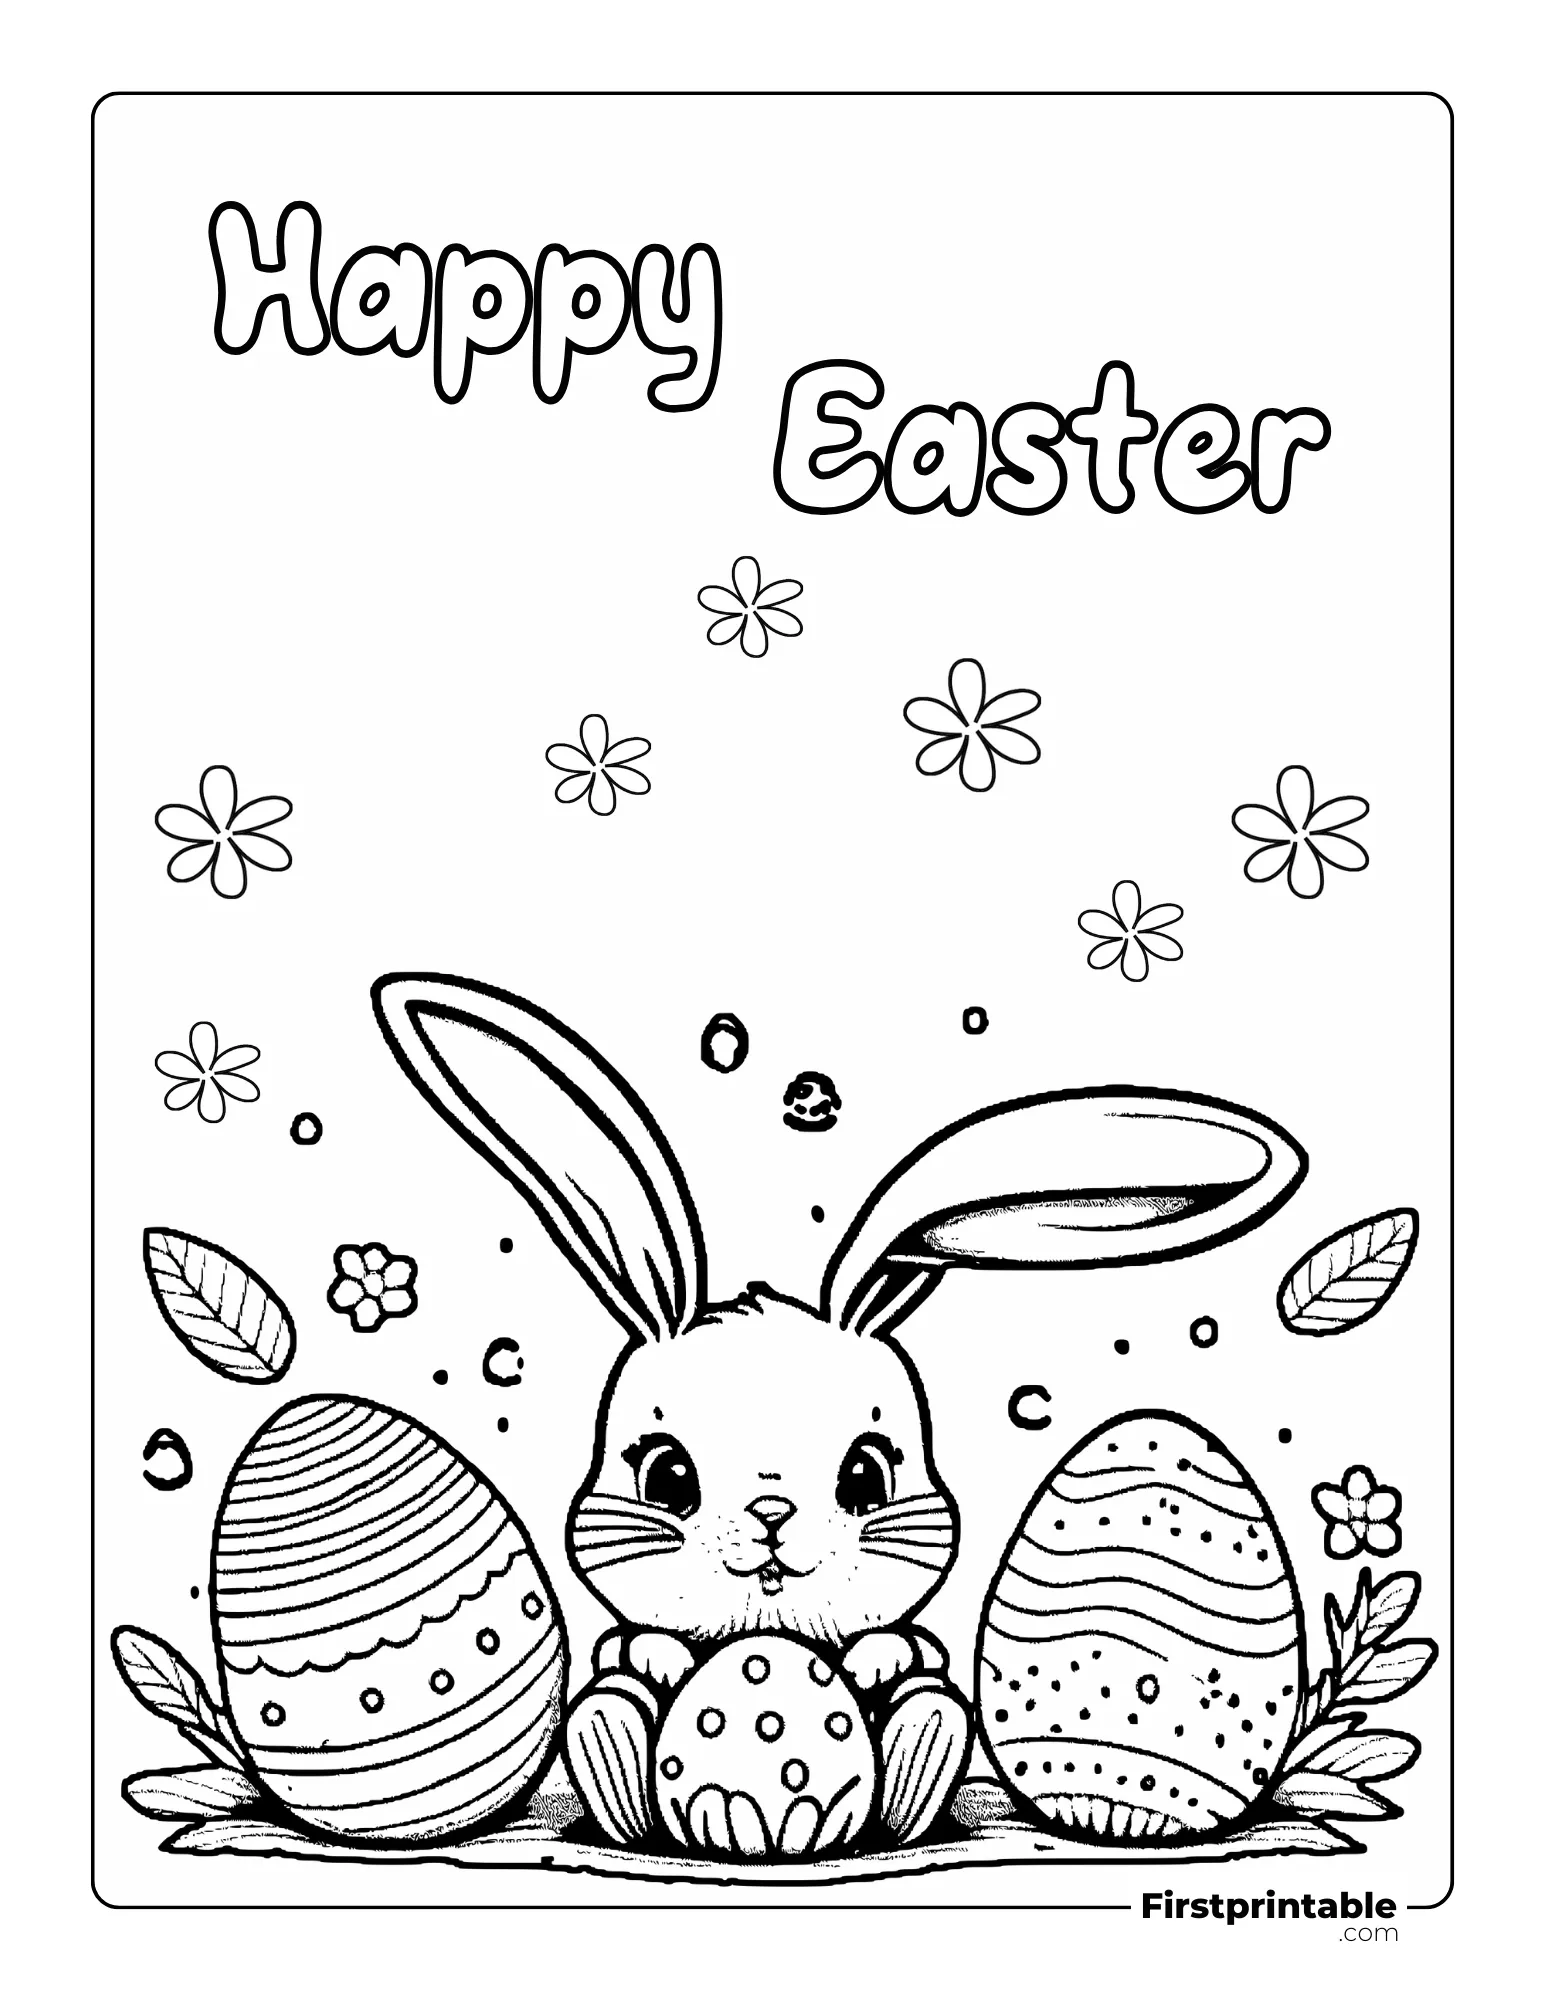 Cute happy Easter bunny and eggs to color